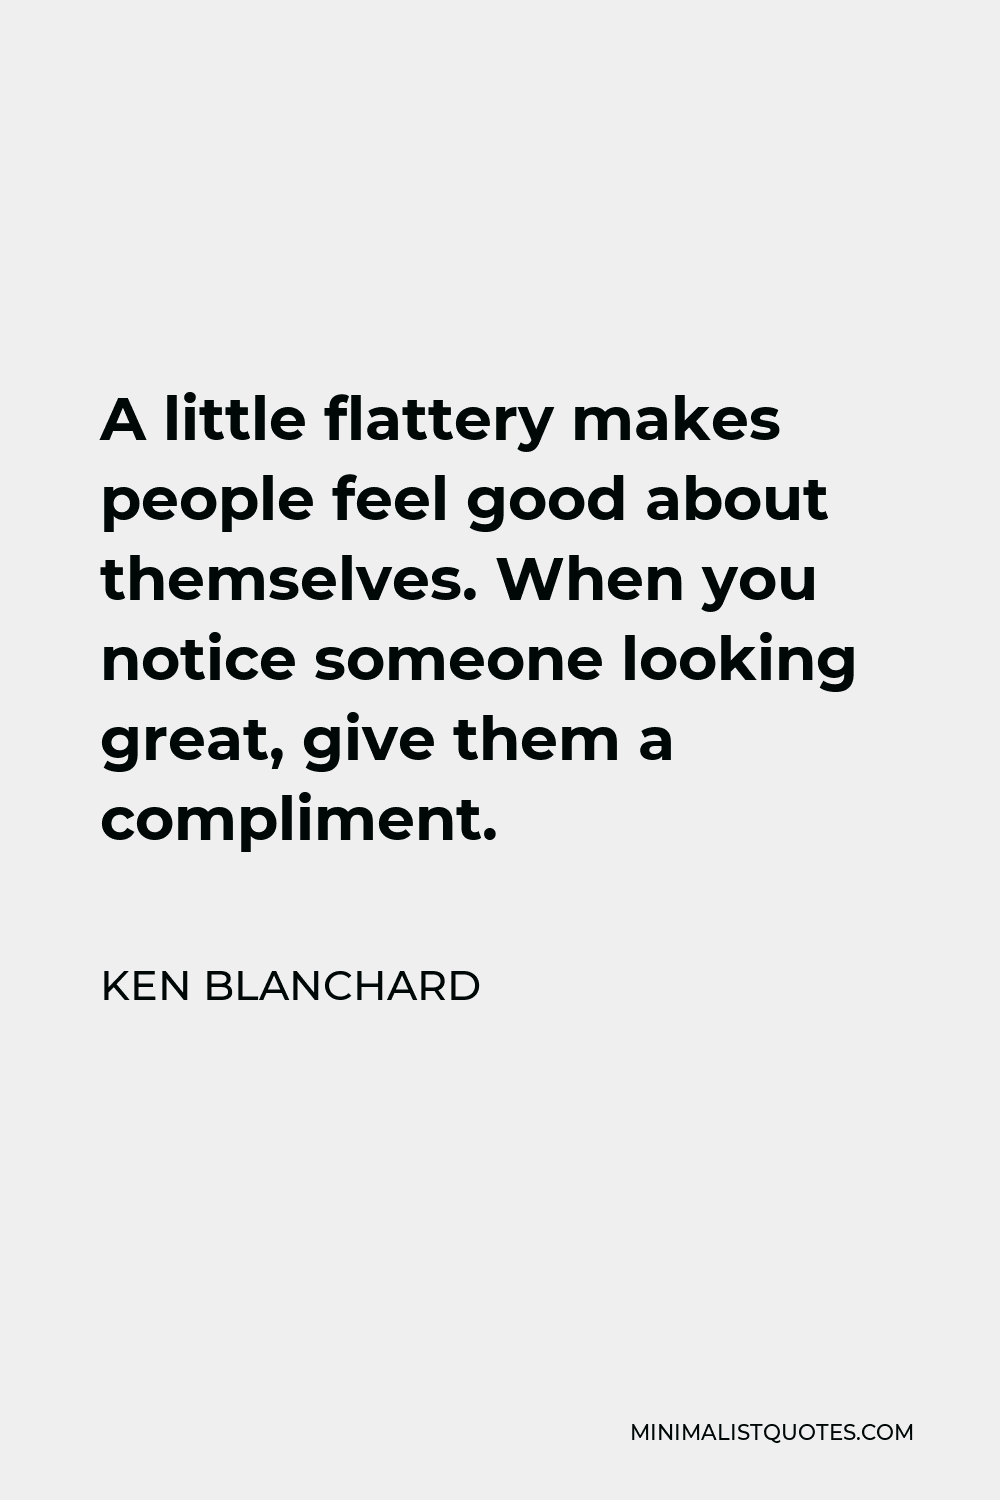 Ken Blanchard Quote - A little flattery makes people feel good about themselves. When you notice someone looking great, give them a compliment.